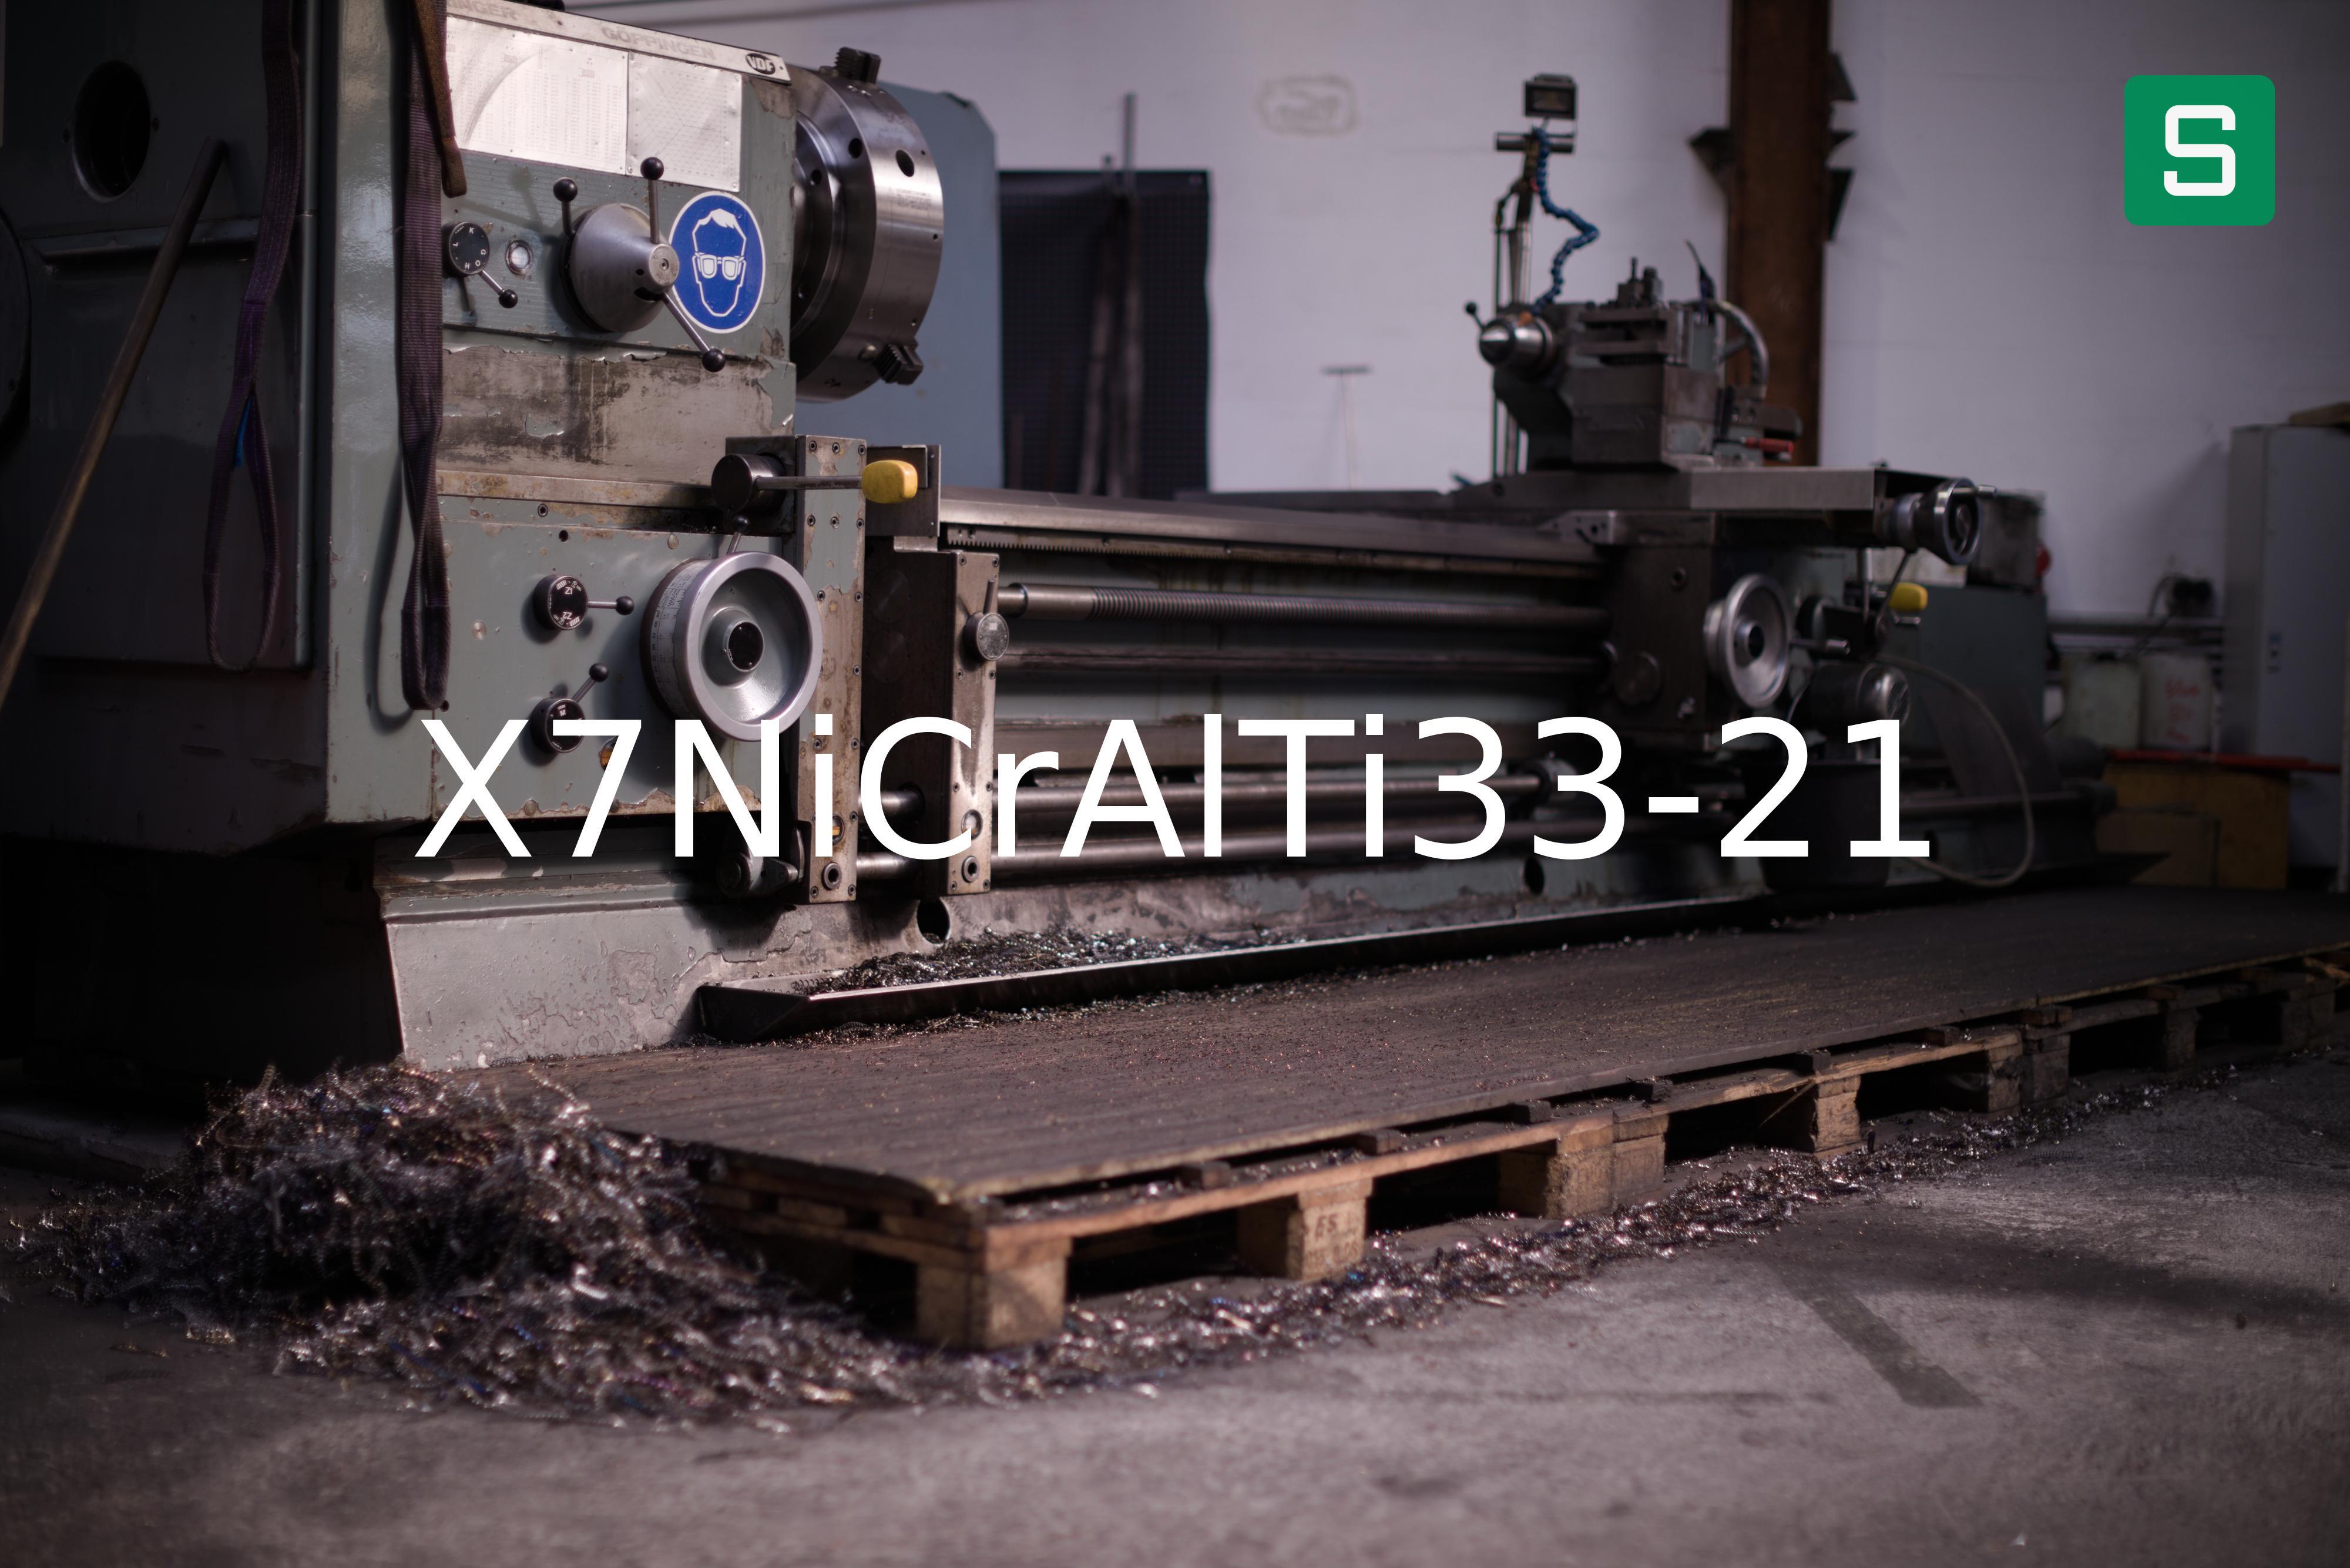 Steel Material: X7NiCrAlTi33-21